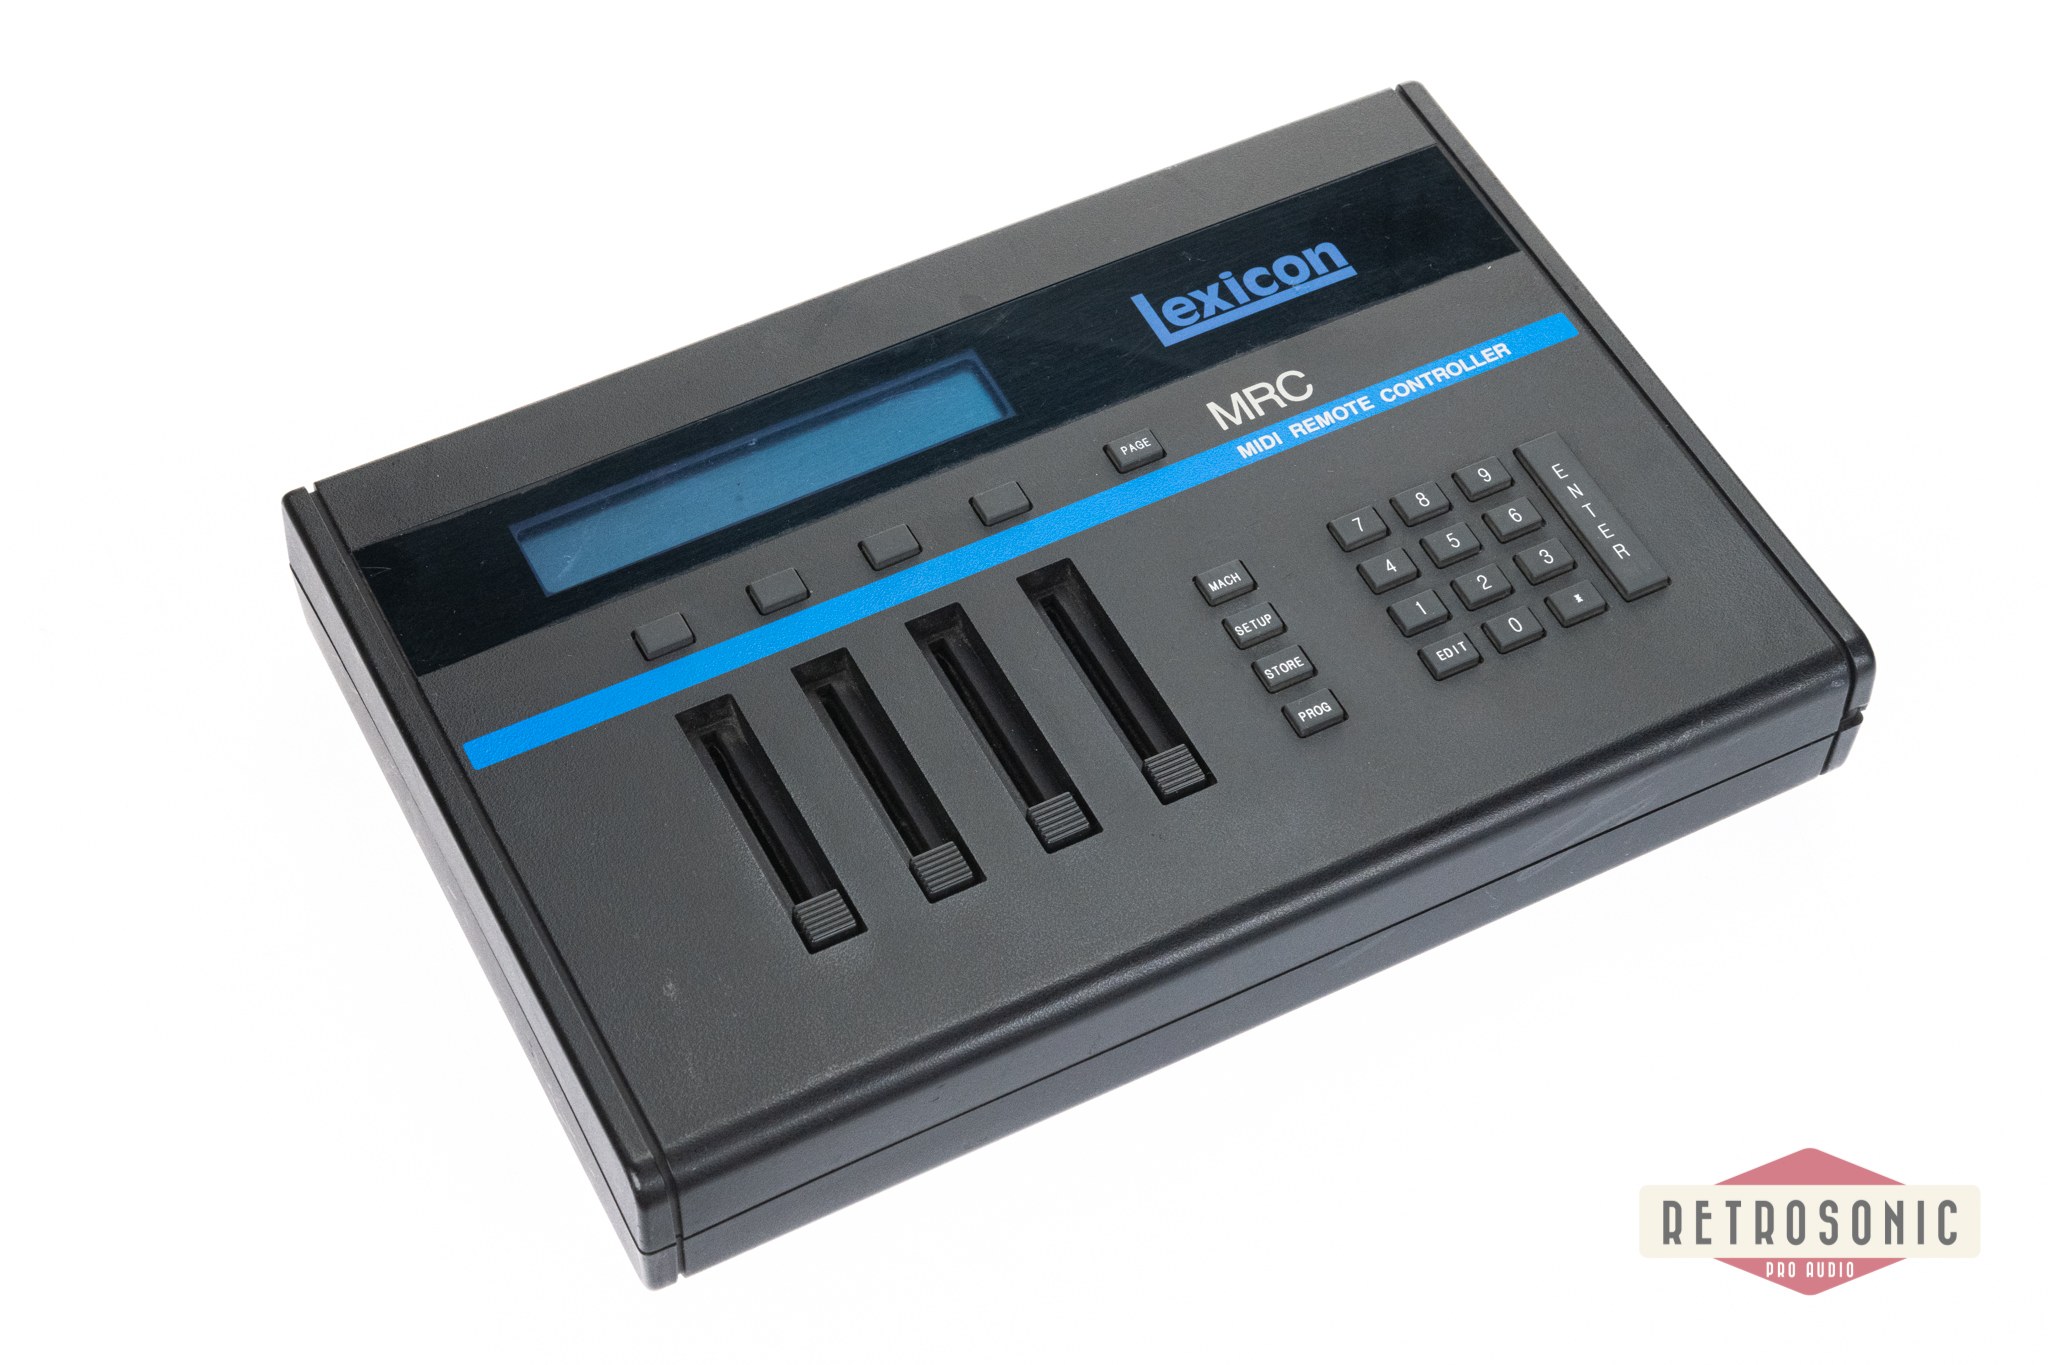 Lexicon LXP-1 set of two with MRC Midi Remote Controller